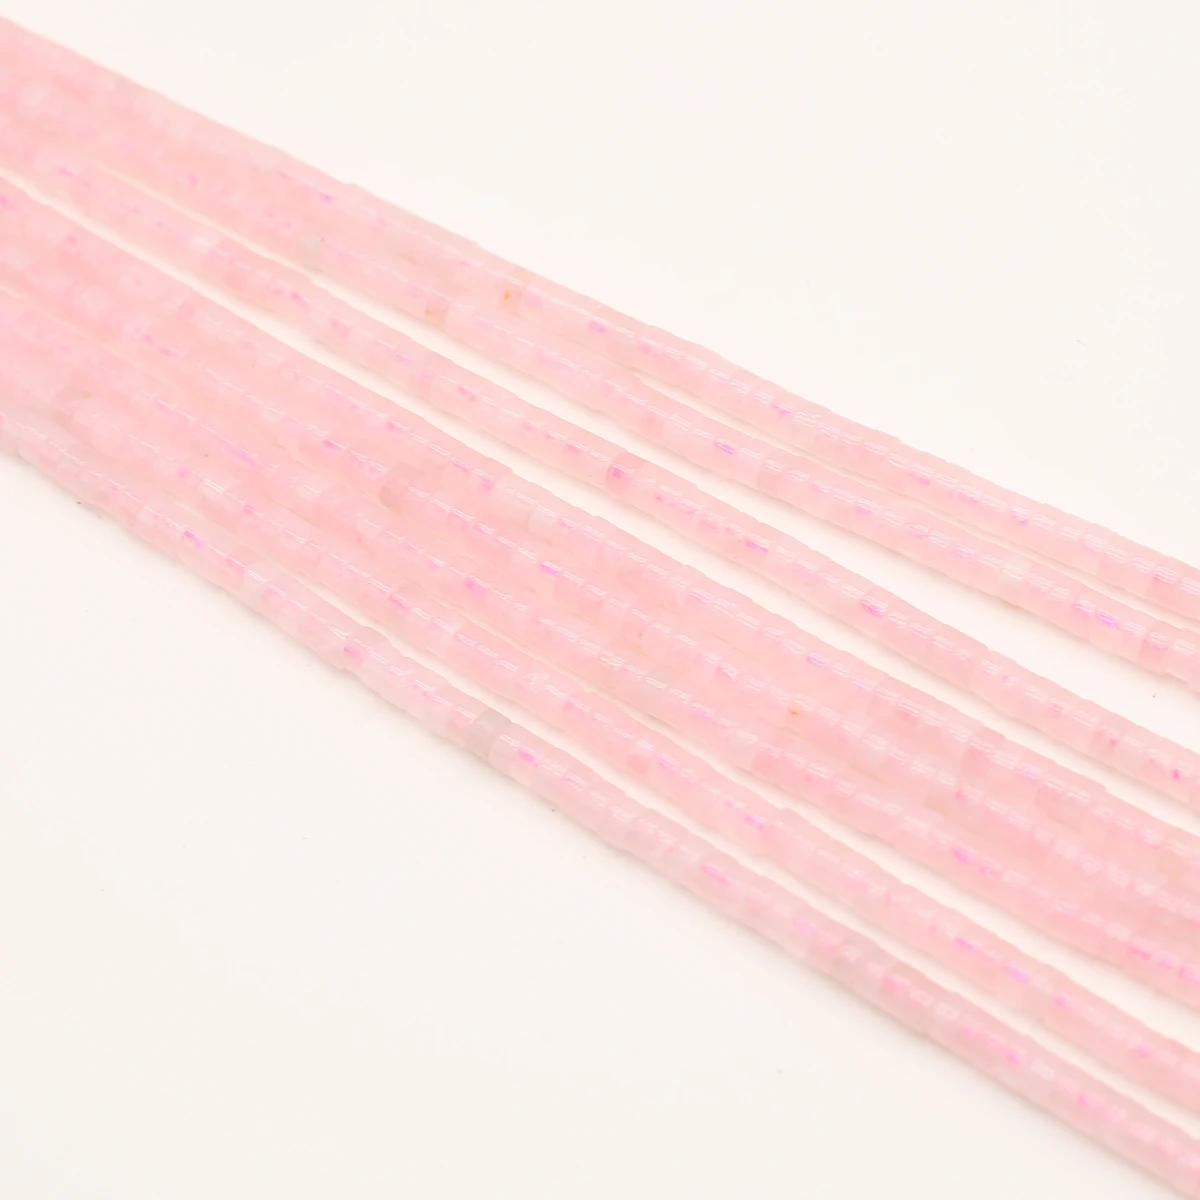 

Faceted Natural Pink Stones Gem Beads 2x4mm Cylindrical Loose Spacer Beads for Jewelry Making DIY Necklace Bracelet Accessories